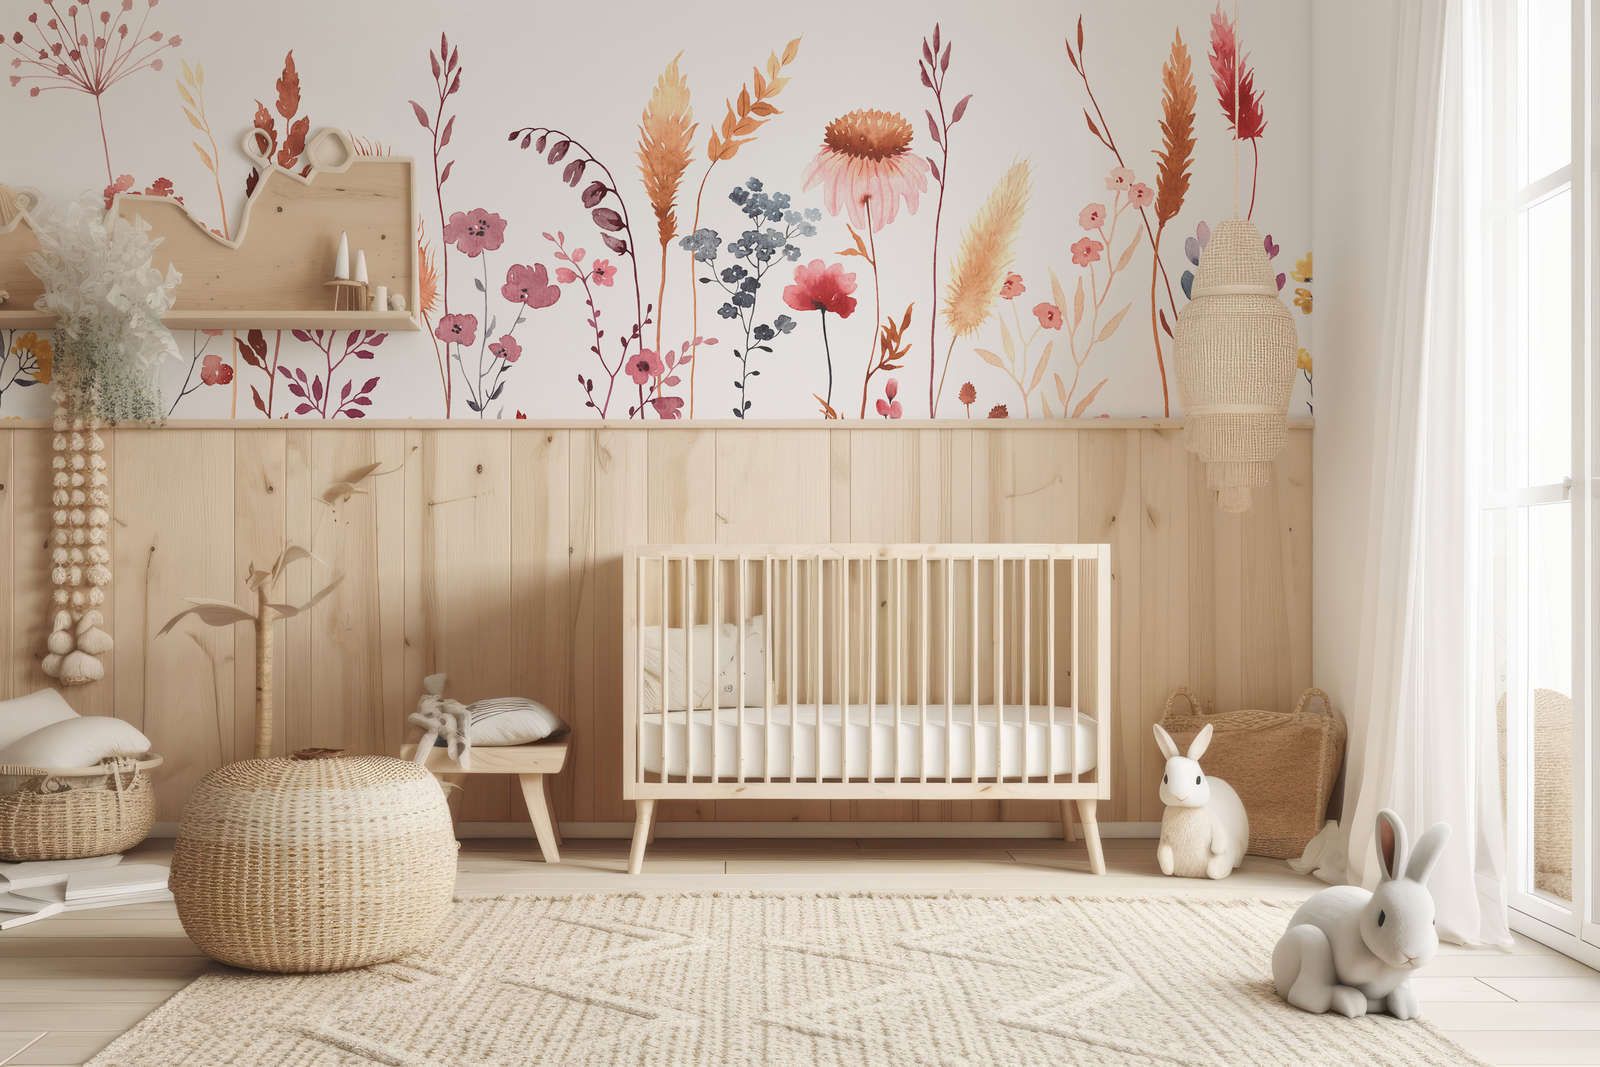             Photo wallpaper for children's room with leaves and grasses - Smooth & slightly shiny non-woven
        